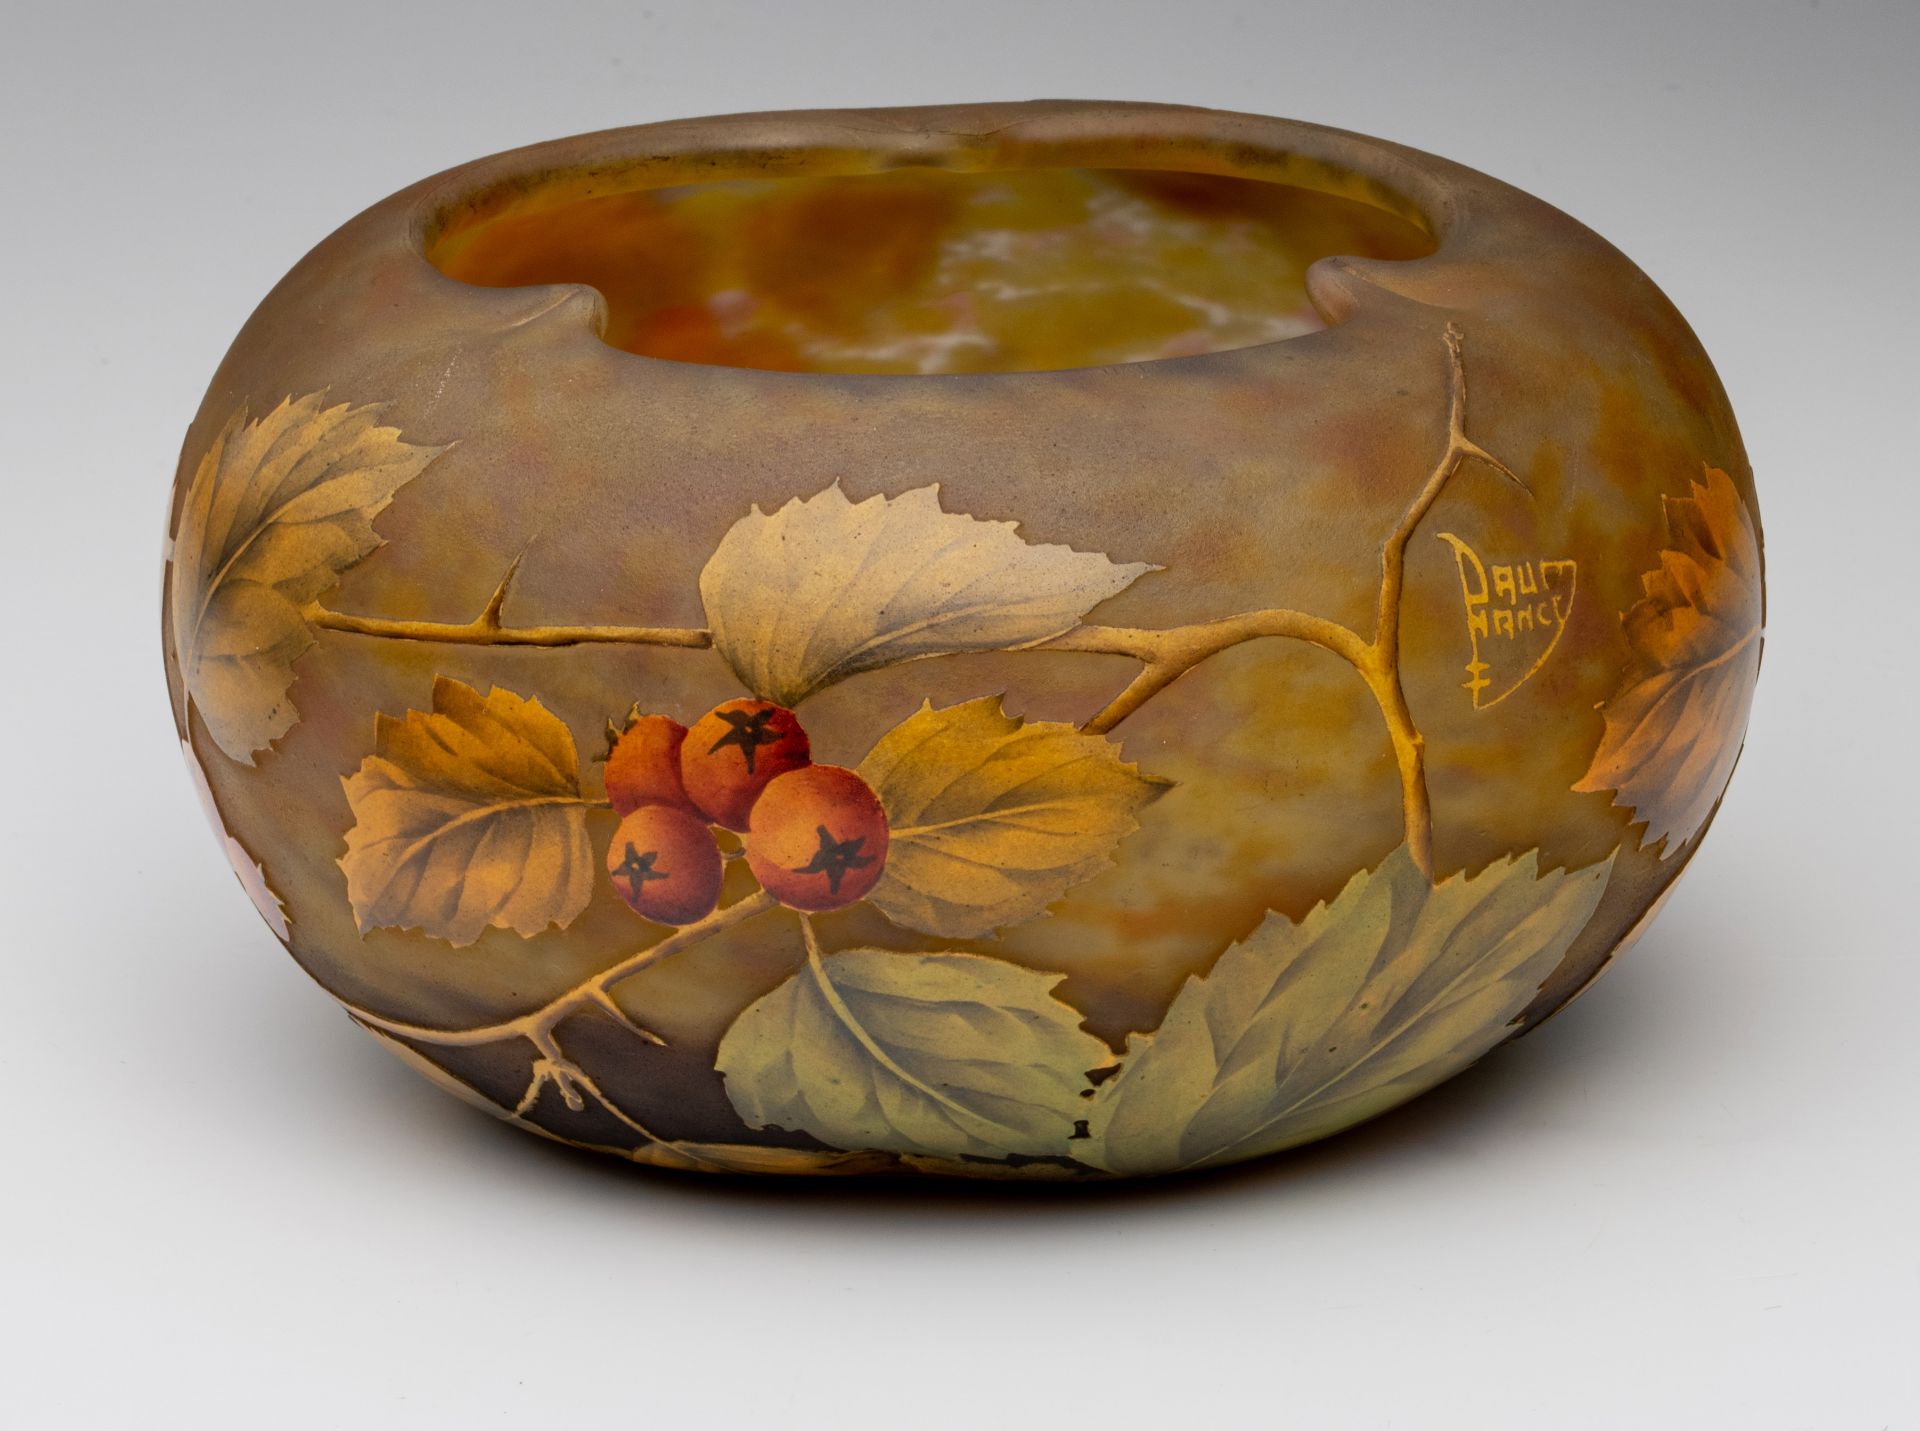 (BIDDING ONLY ON CARLOBONTE.BE) A large Art Nouveau style cameo glass paste bowl with floral decorat - Image 2 of 10